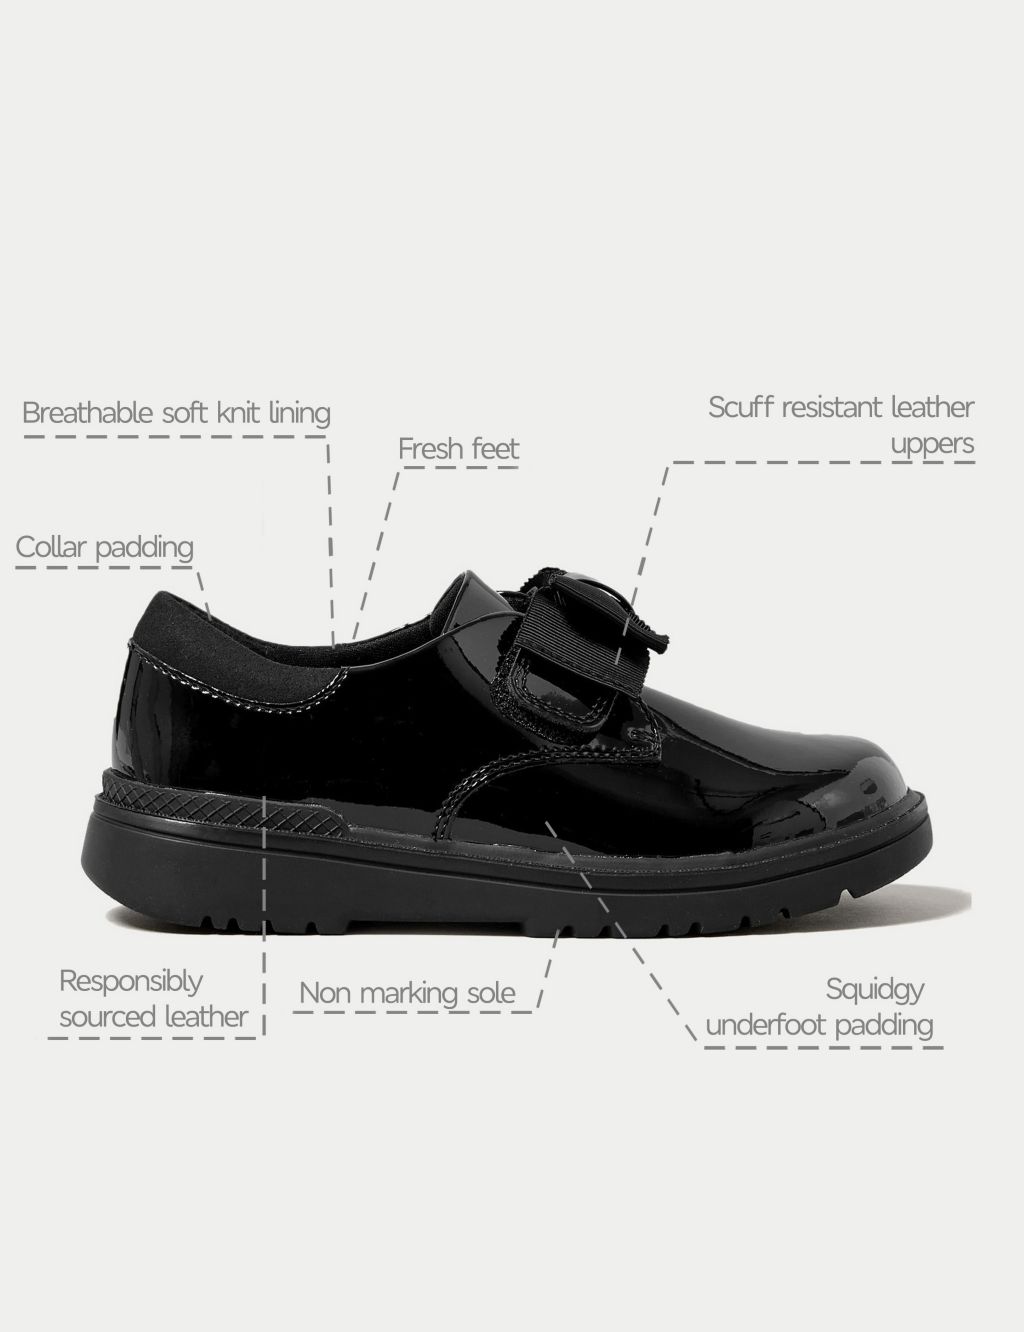 Kids' Leather Freshfeet™ Bow School Shoes (8 Small - 1 Large) image 7